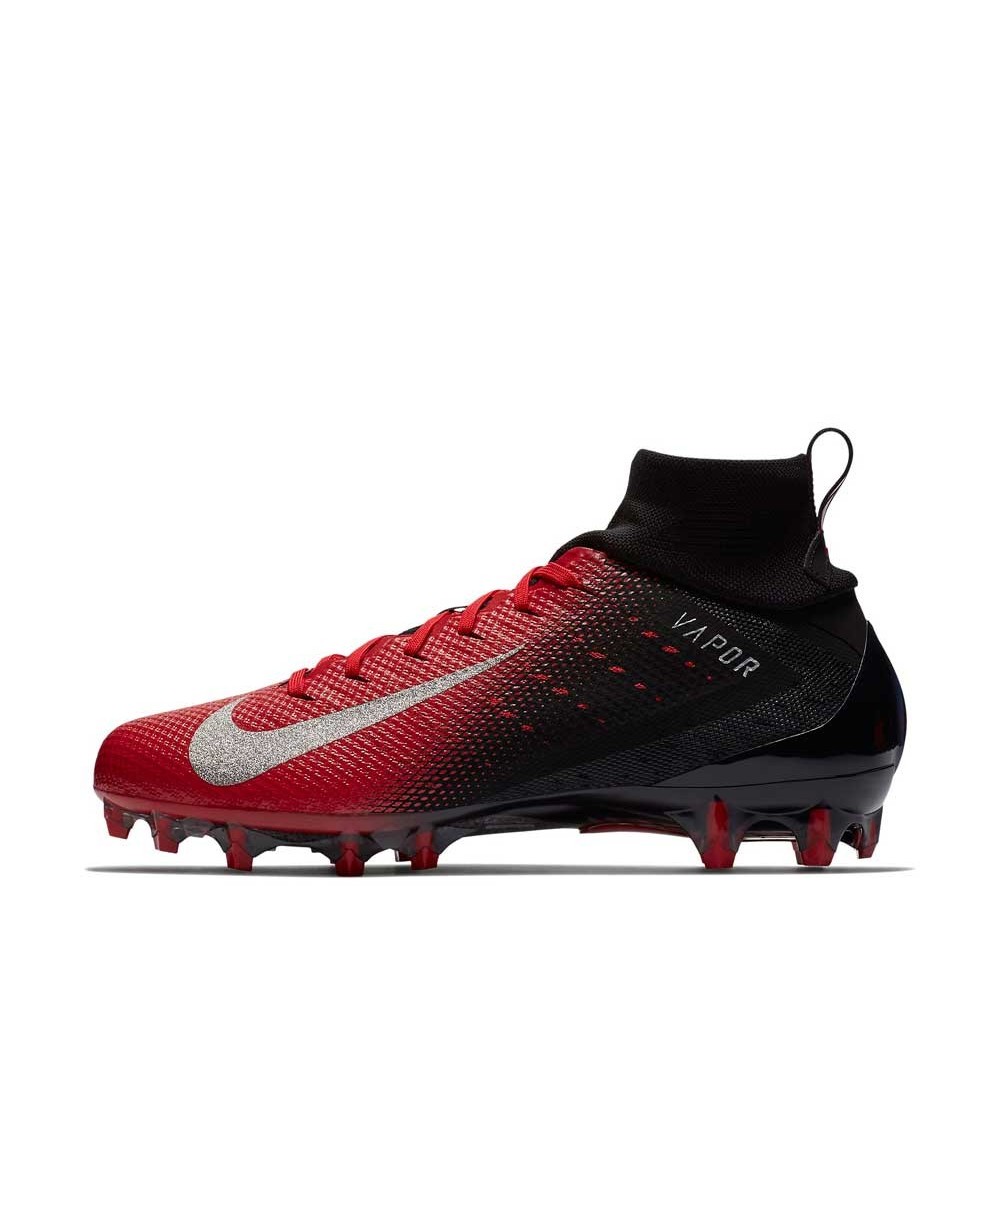 red nike untouchable cleats